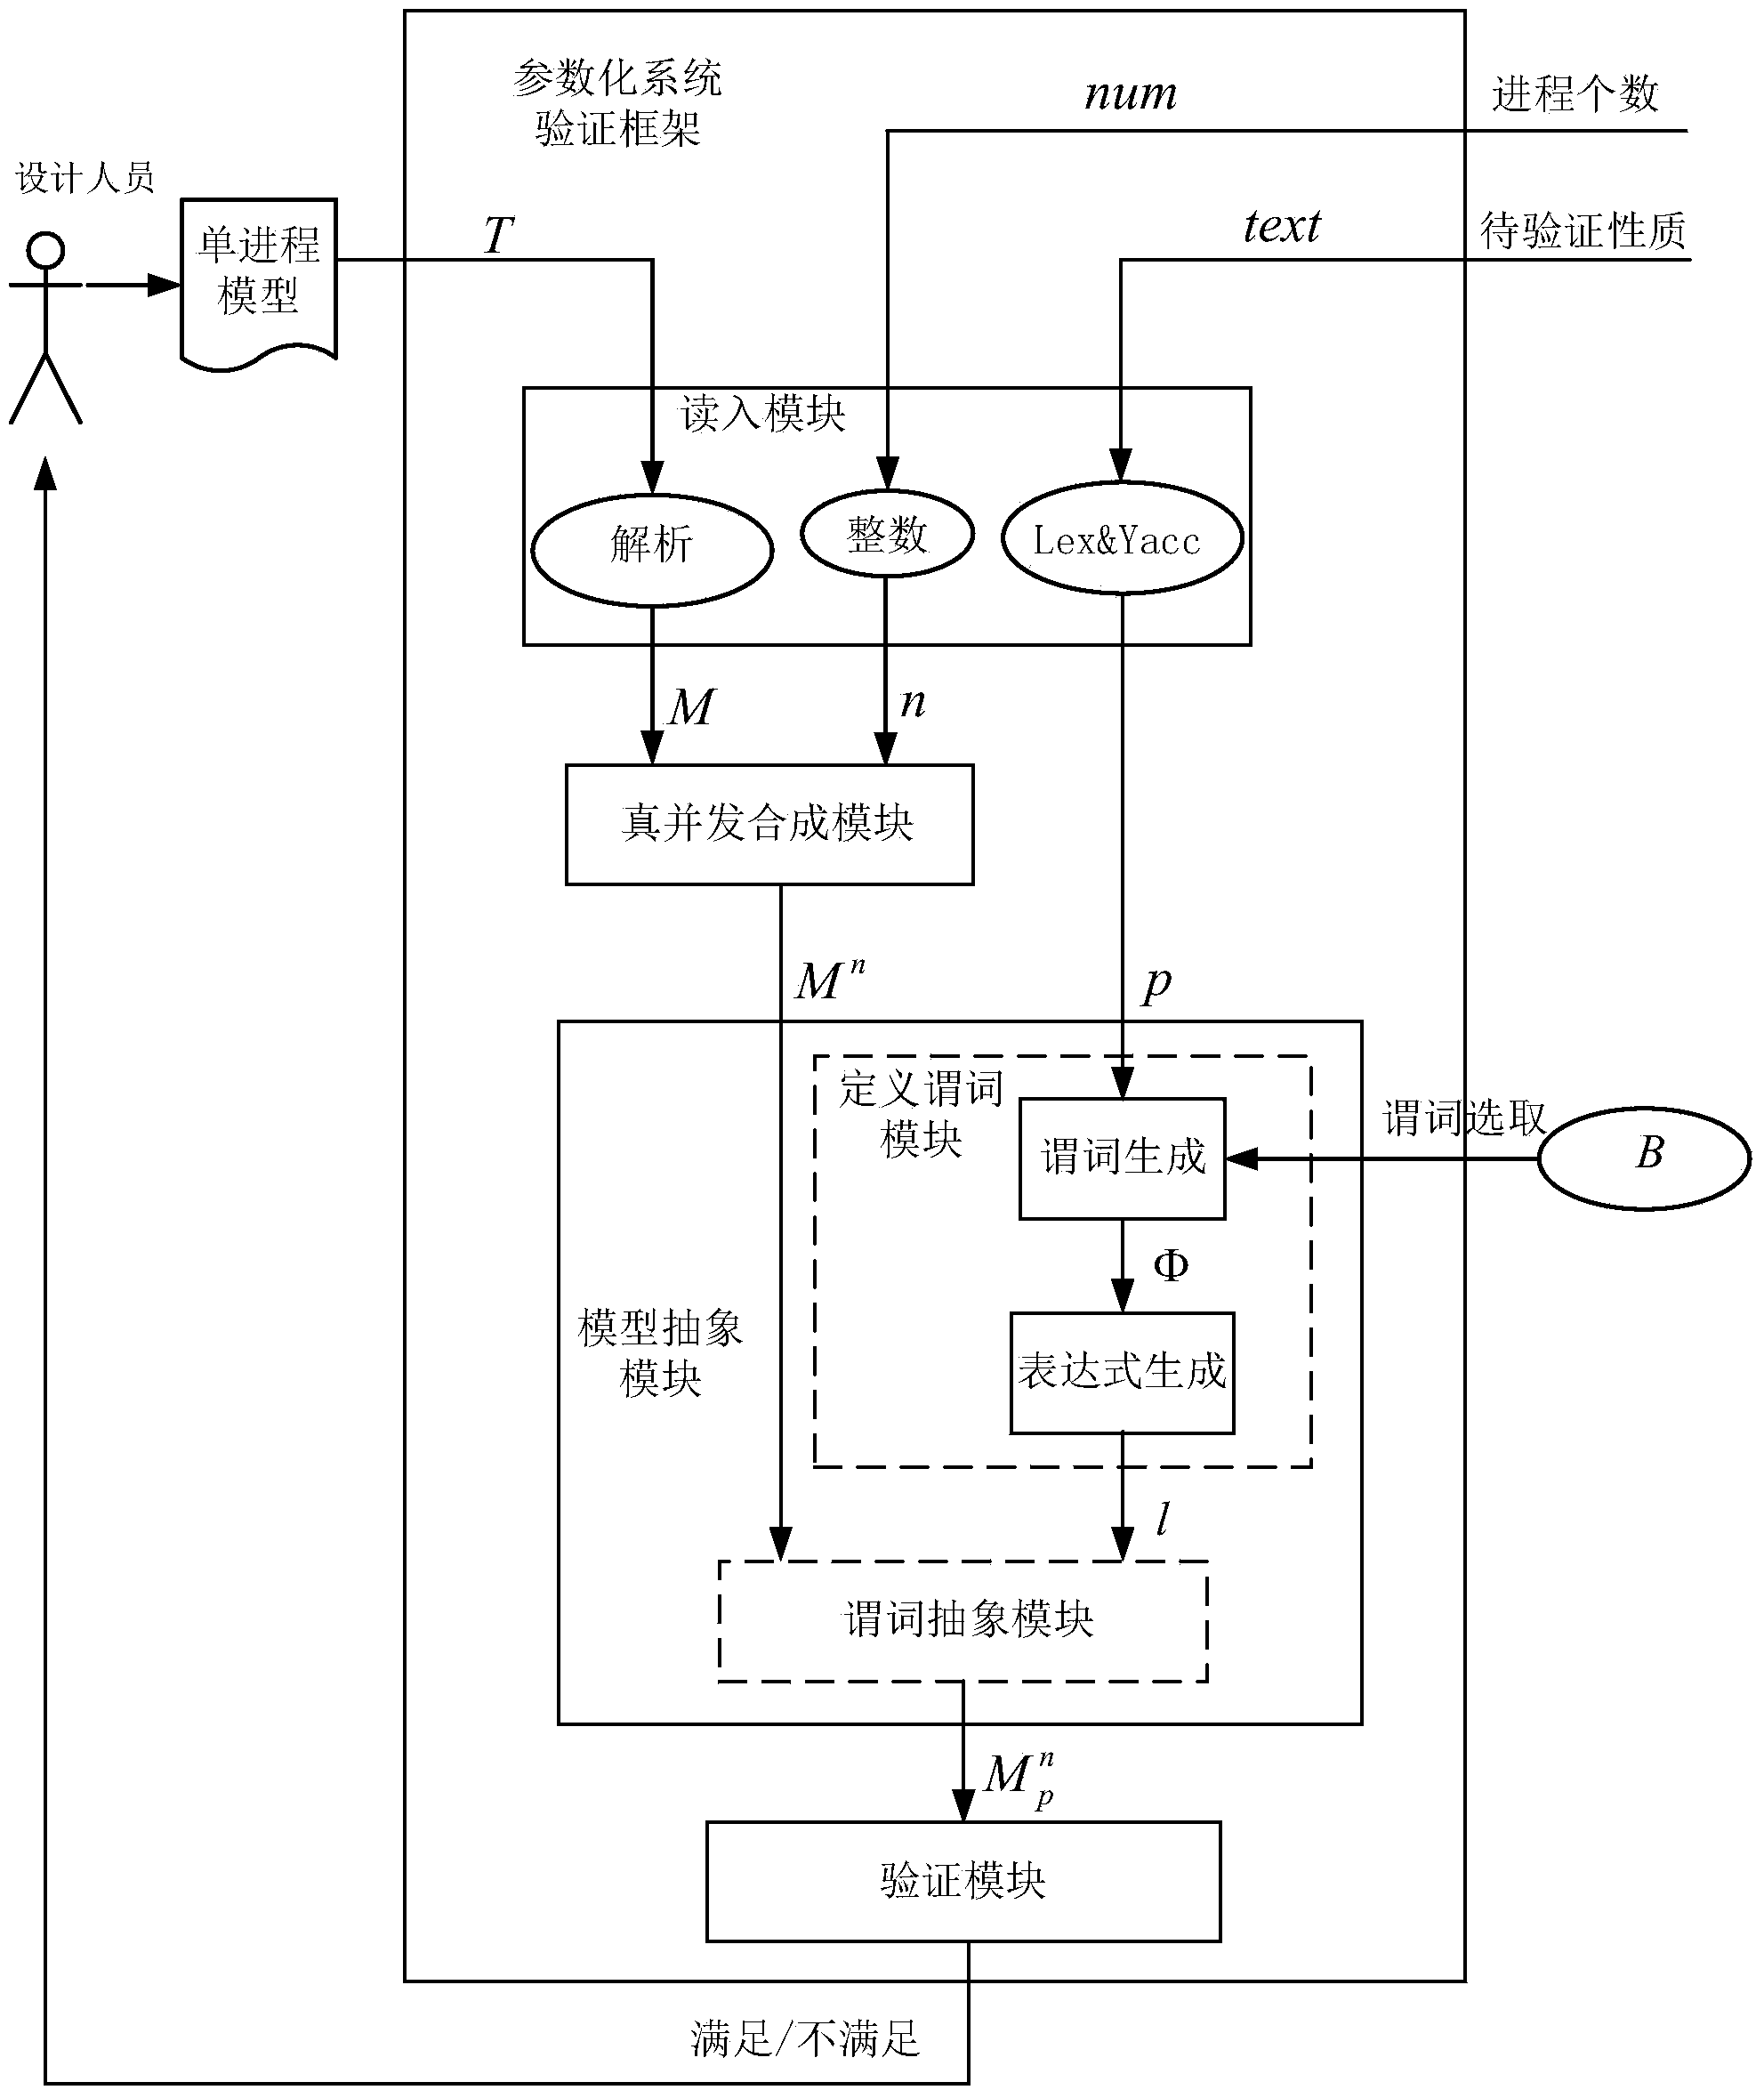 Automatic verification method orienting to parameterization system